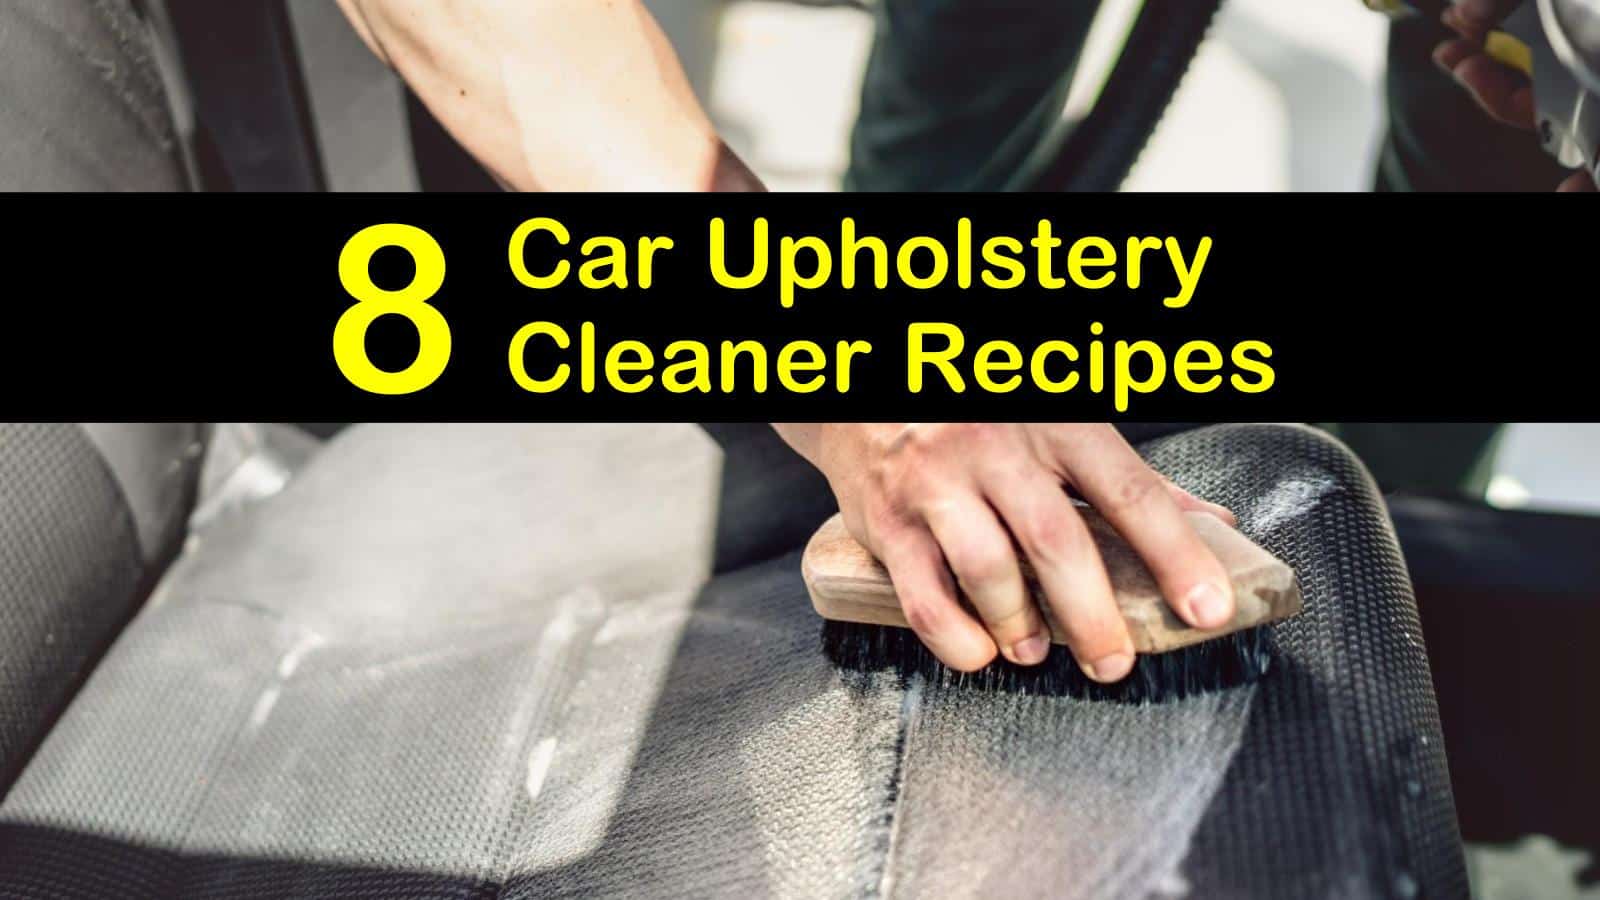 8 Easy-to-Make Car Upholstery Cleaner